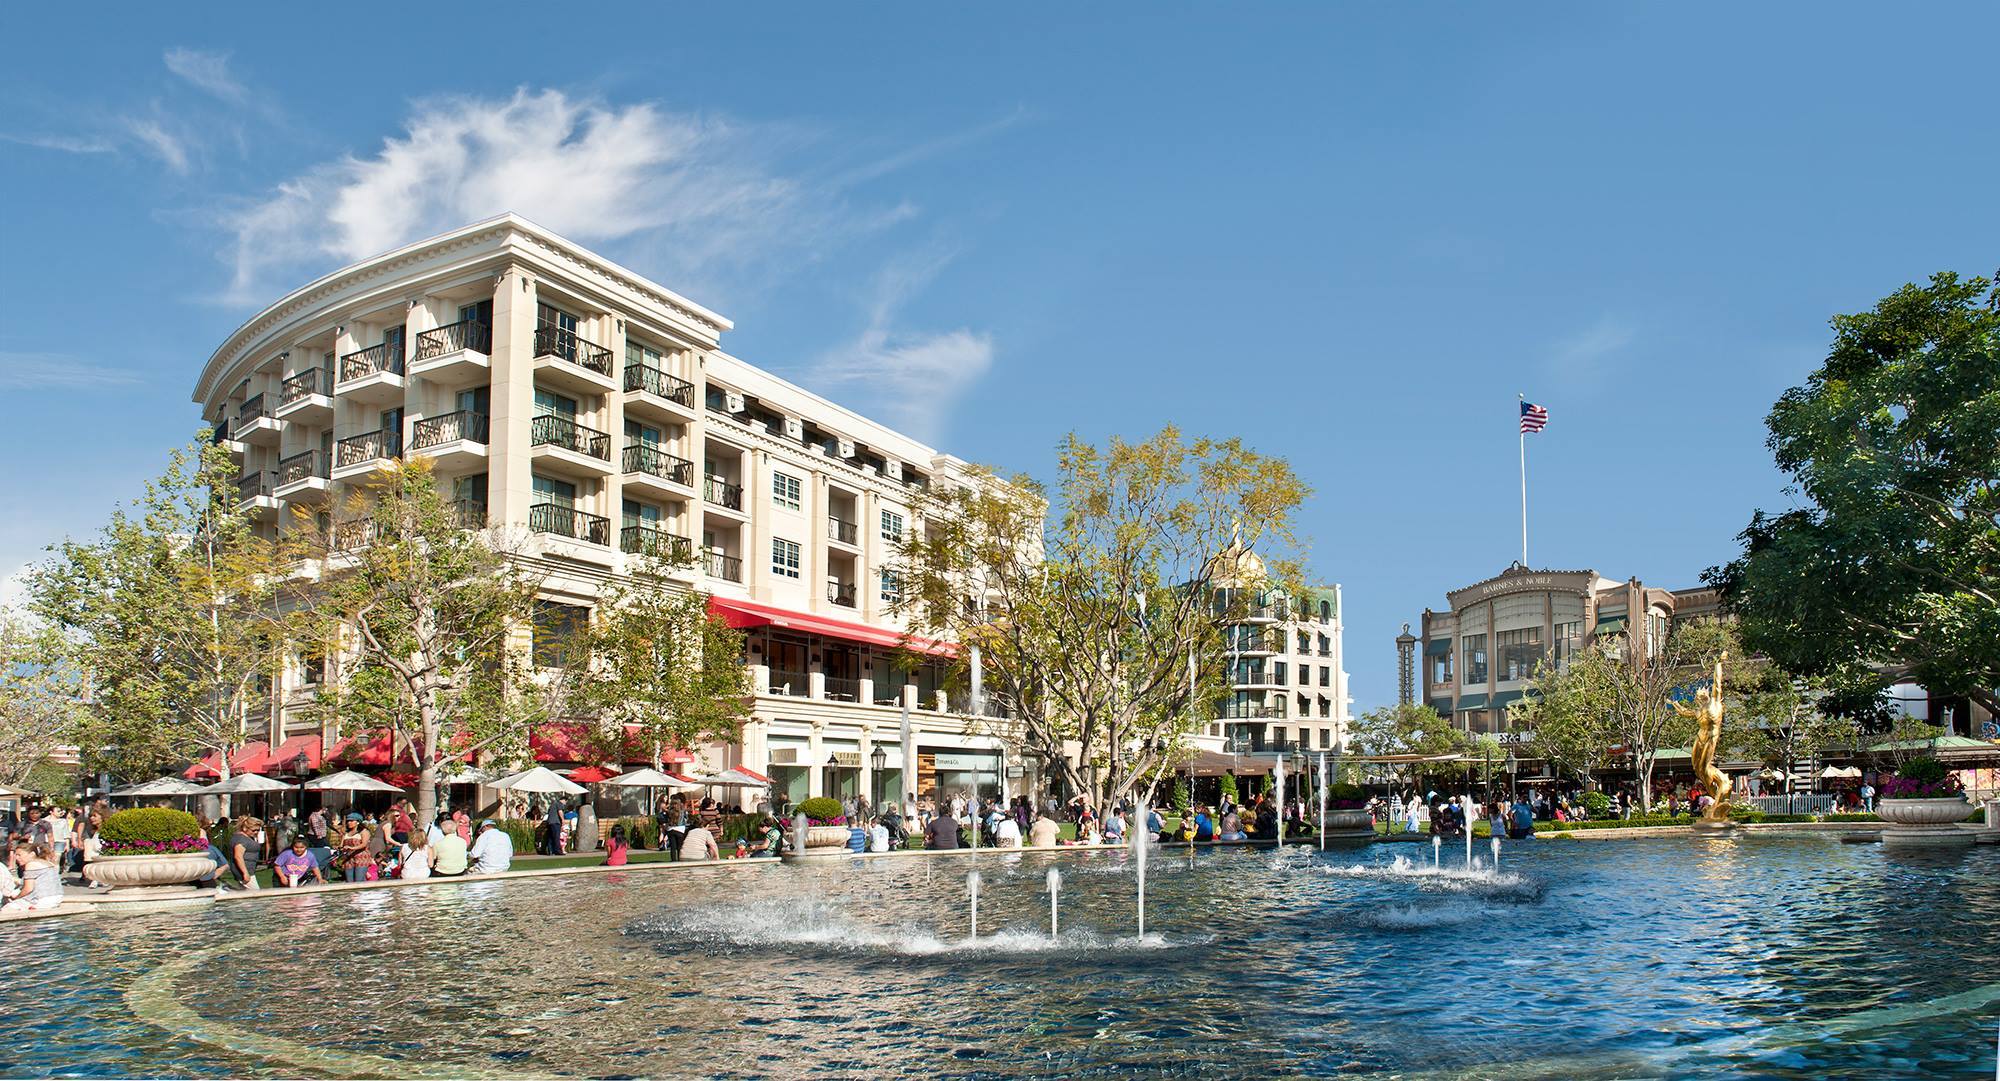 A guide to the Americana in Glendale for outdoor shopping